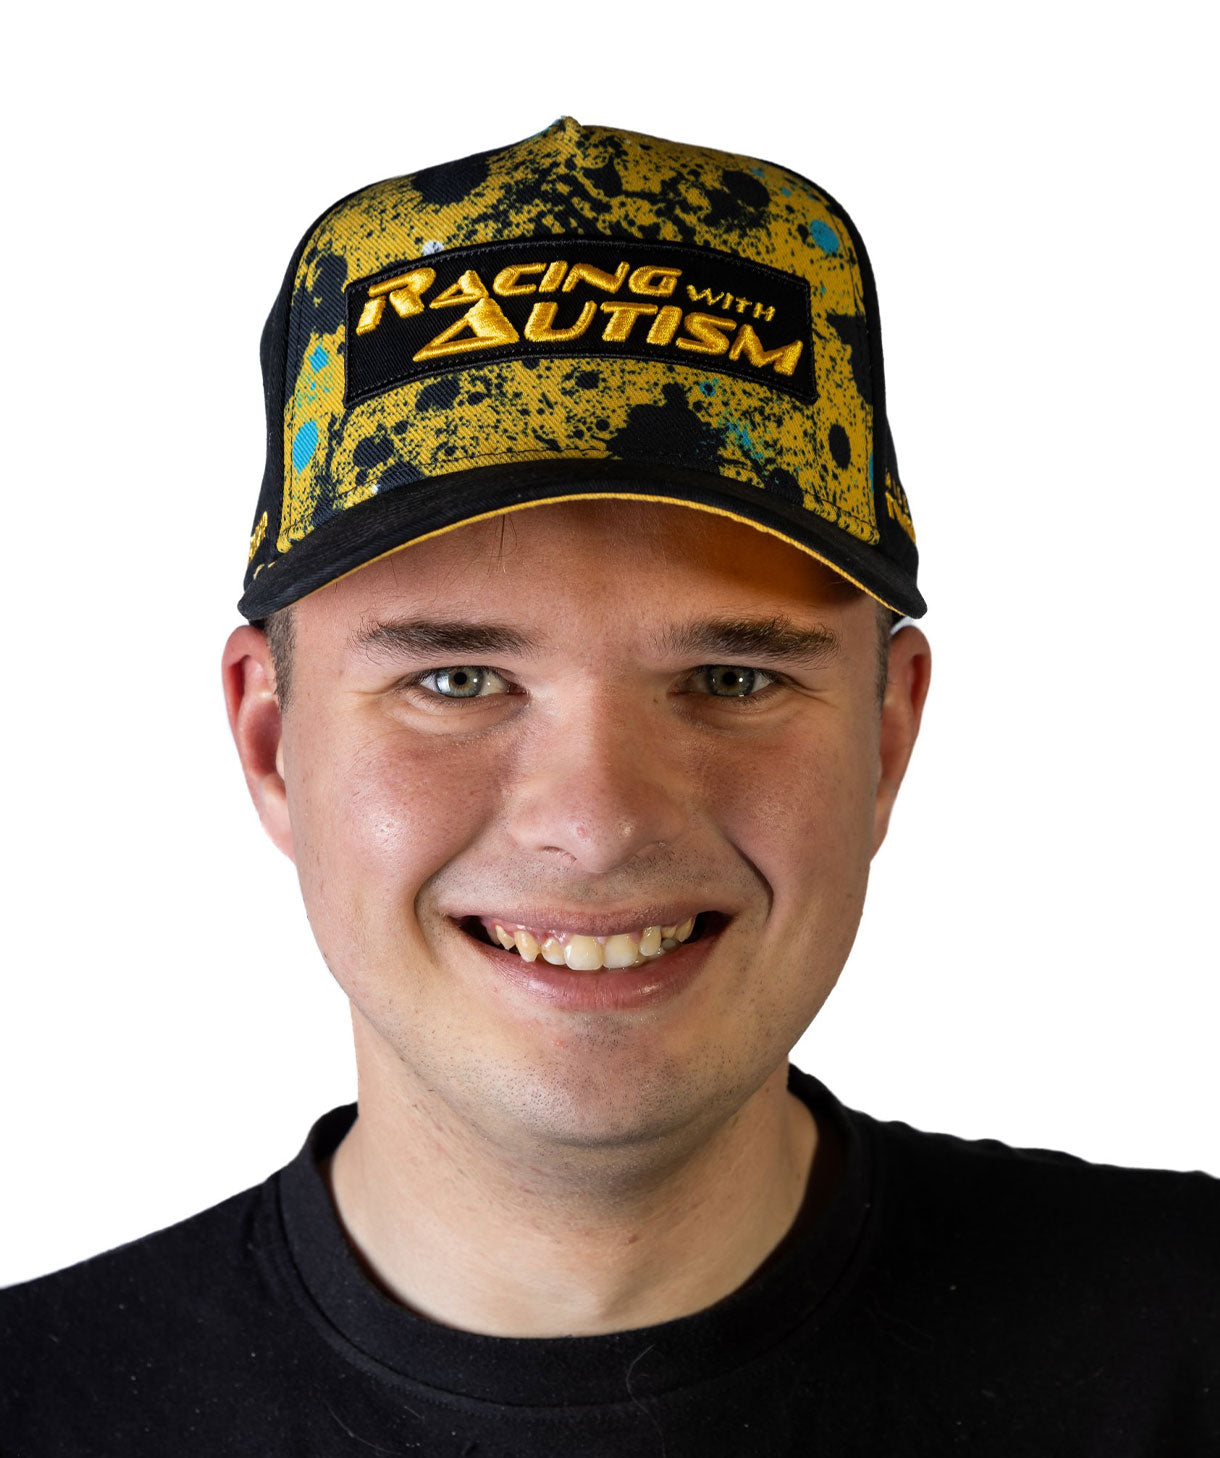 New Racing with Autism fan hat